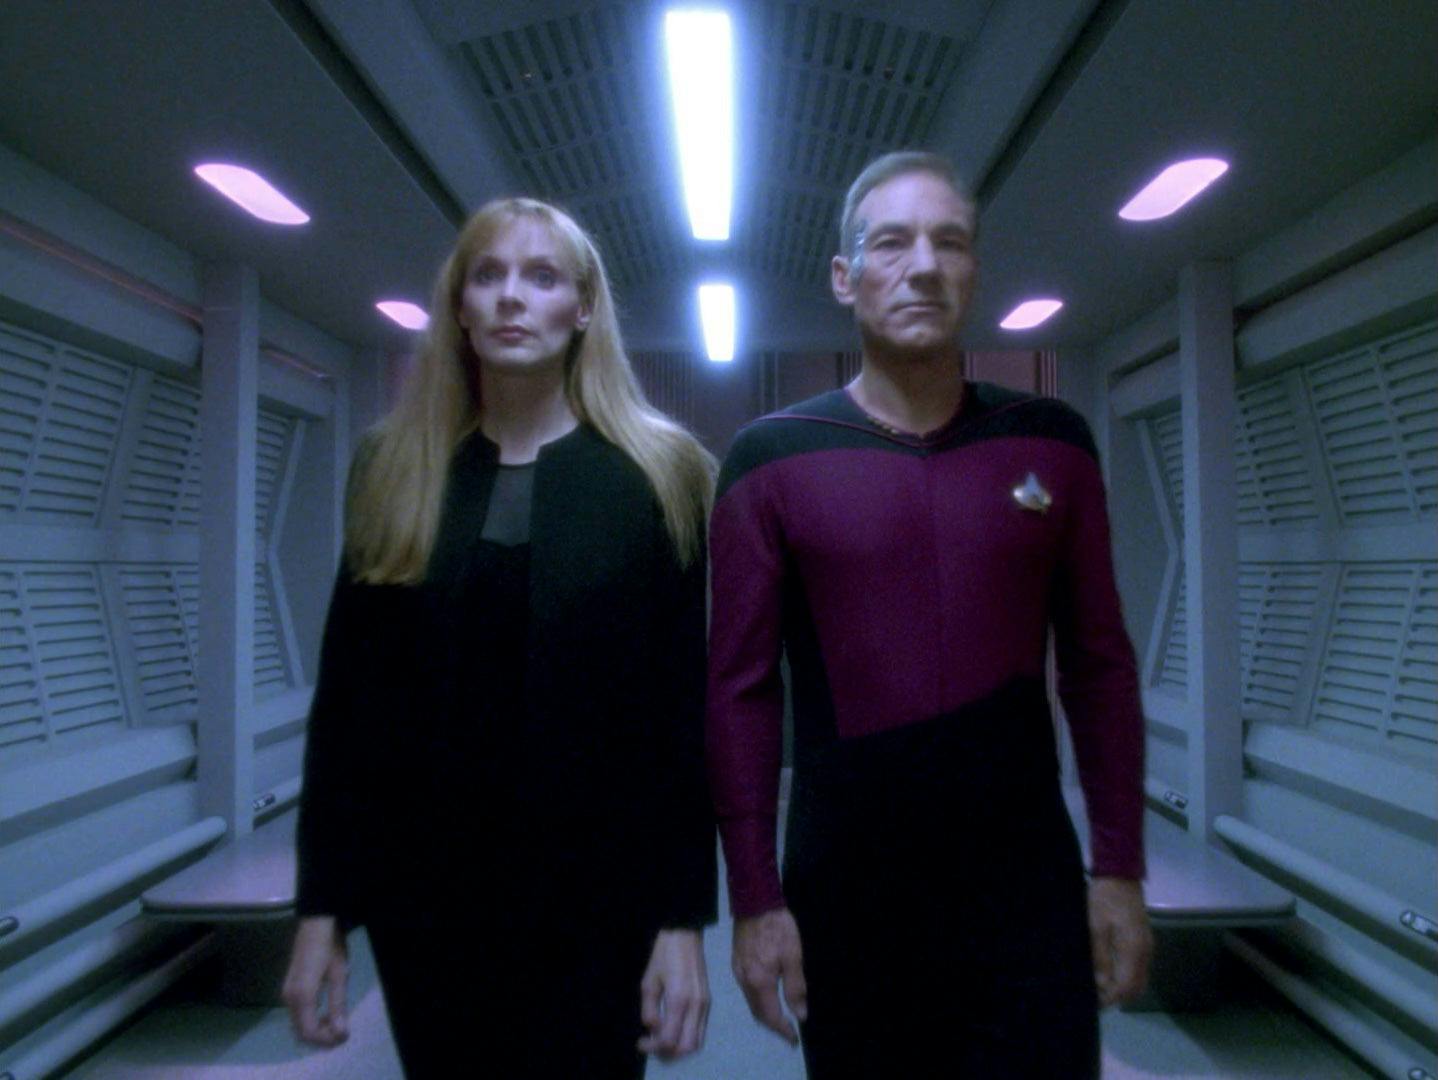 On the subconscious, this is a traumatic memory involving a younger Beverly Crusher and Picard walking down the hallway on Star Trek: The Next Generation